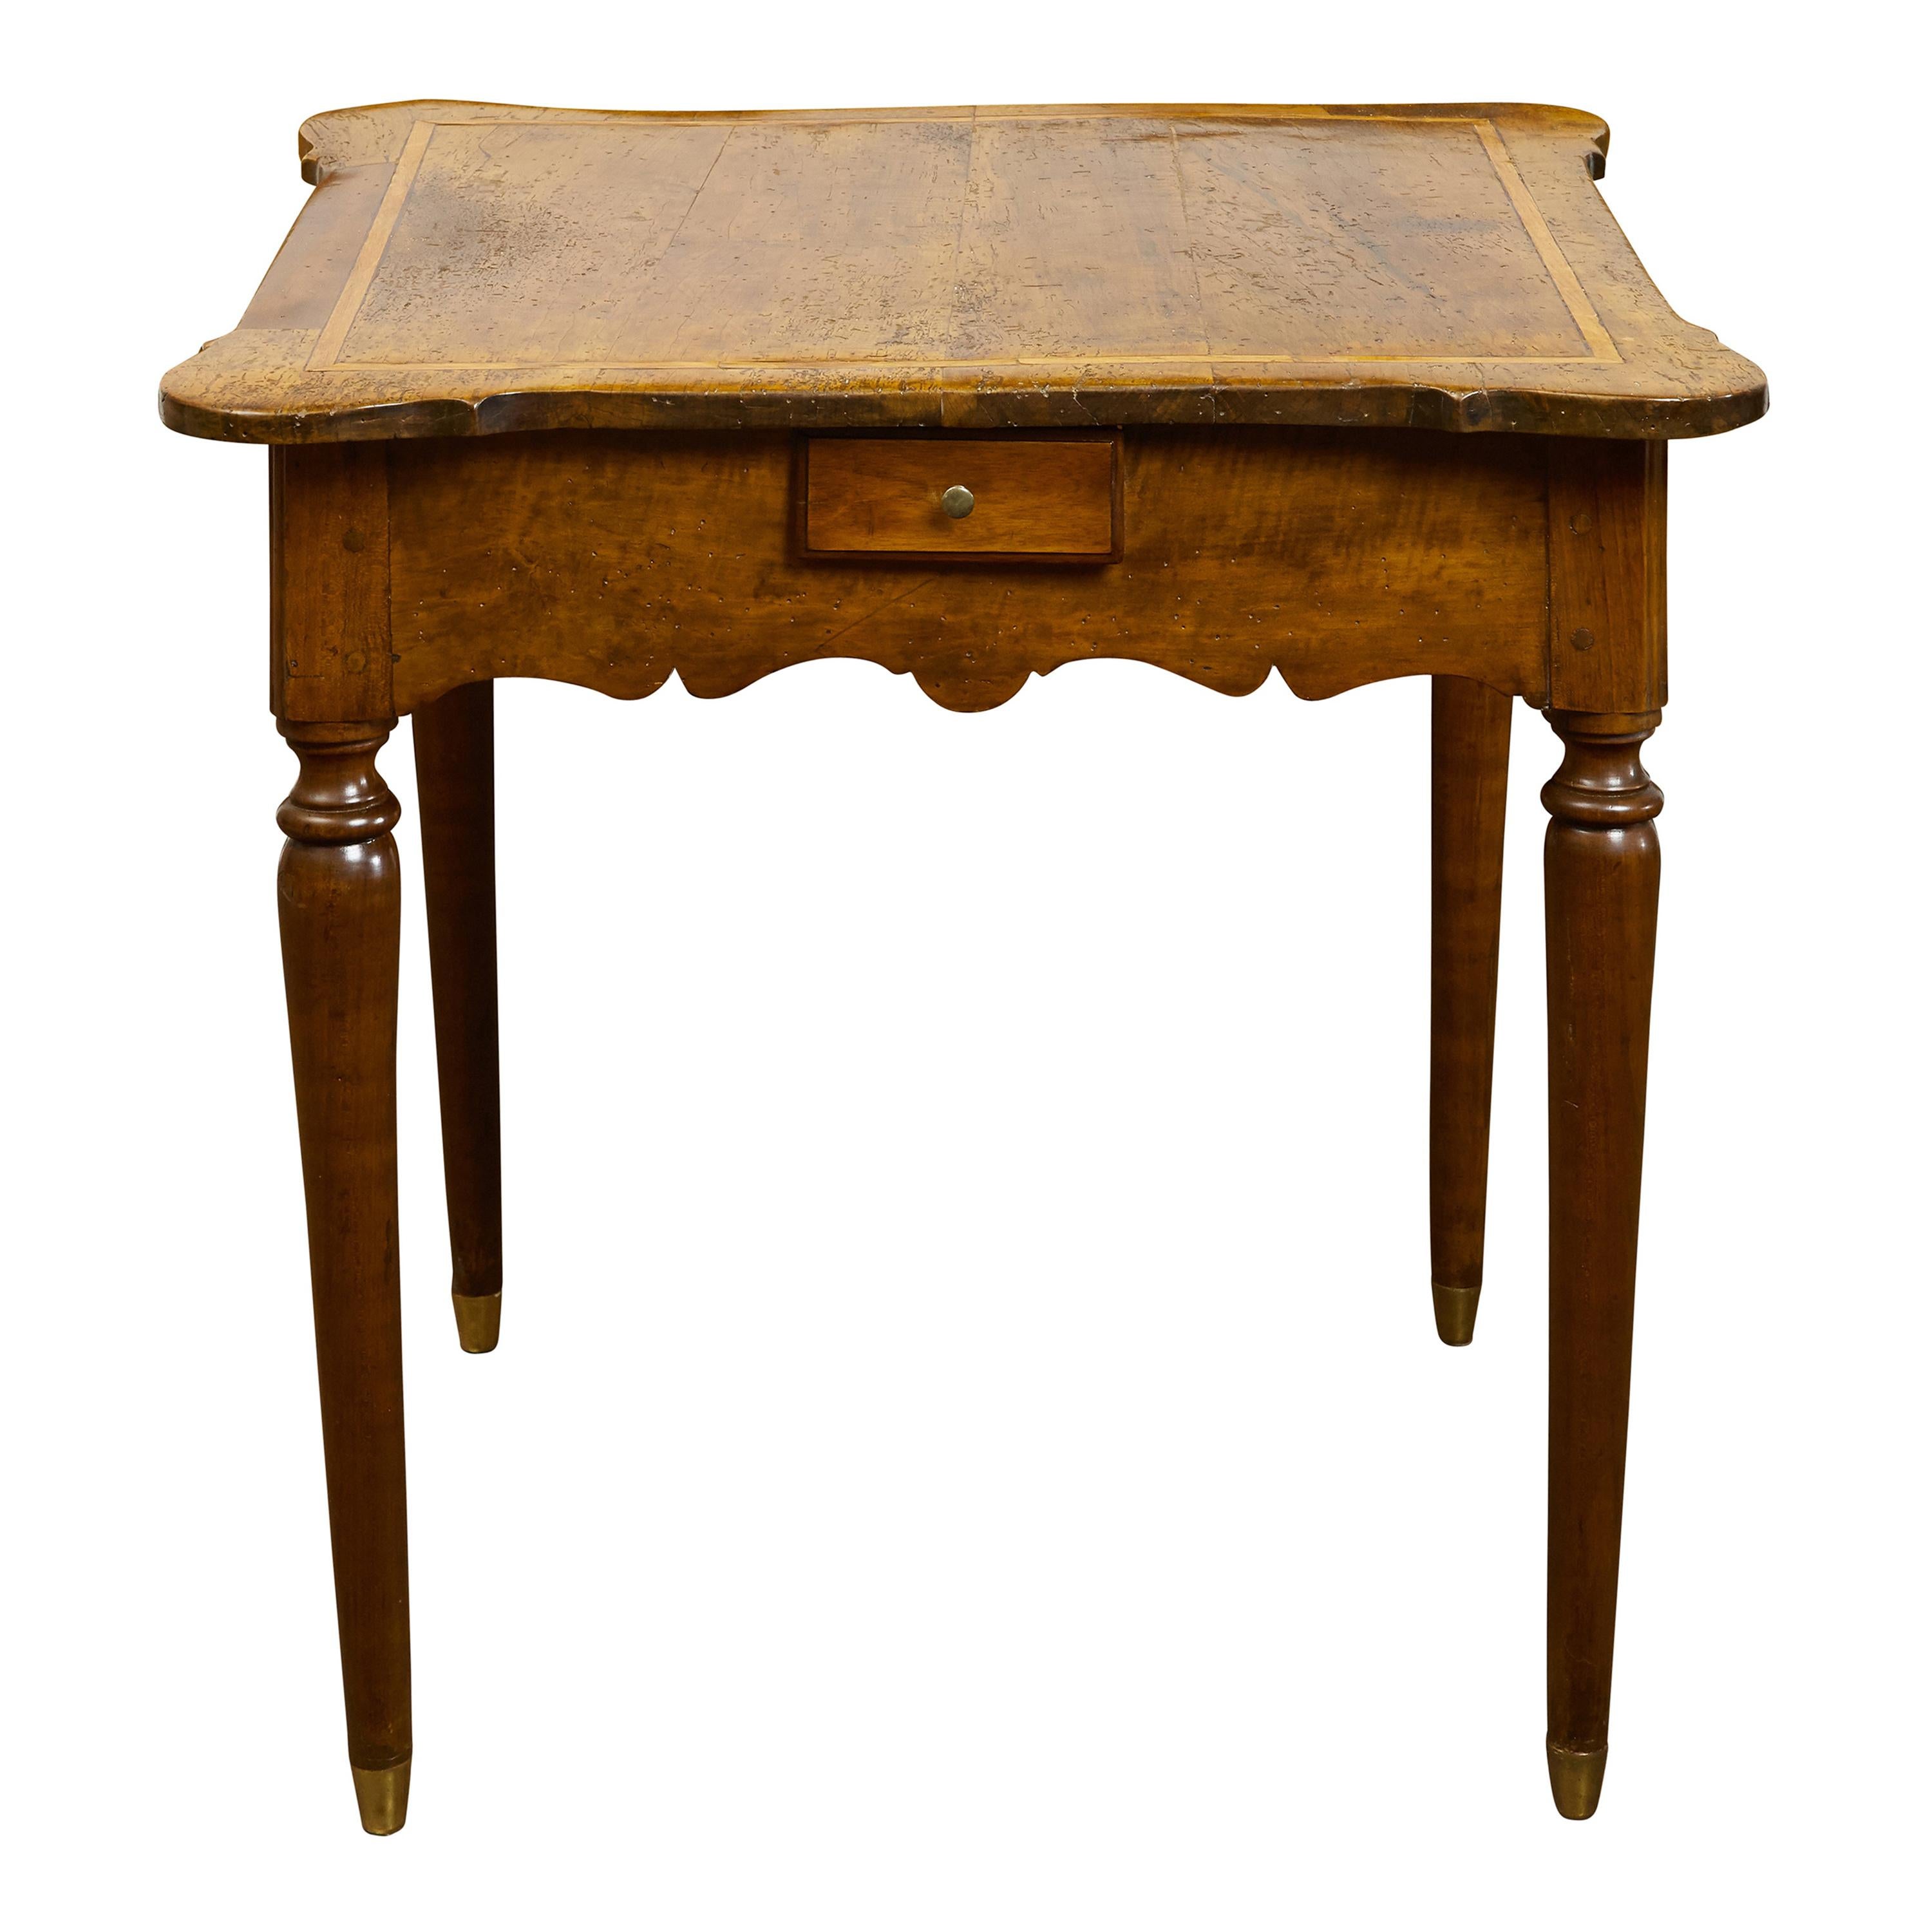 French 1800s Walnut Table with Banding, Four Petite Drawers and Carved Apron